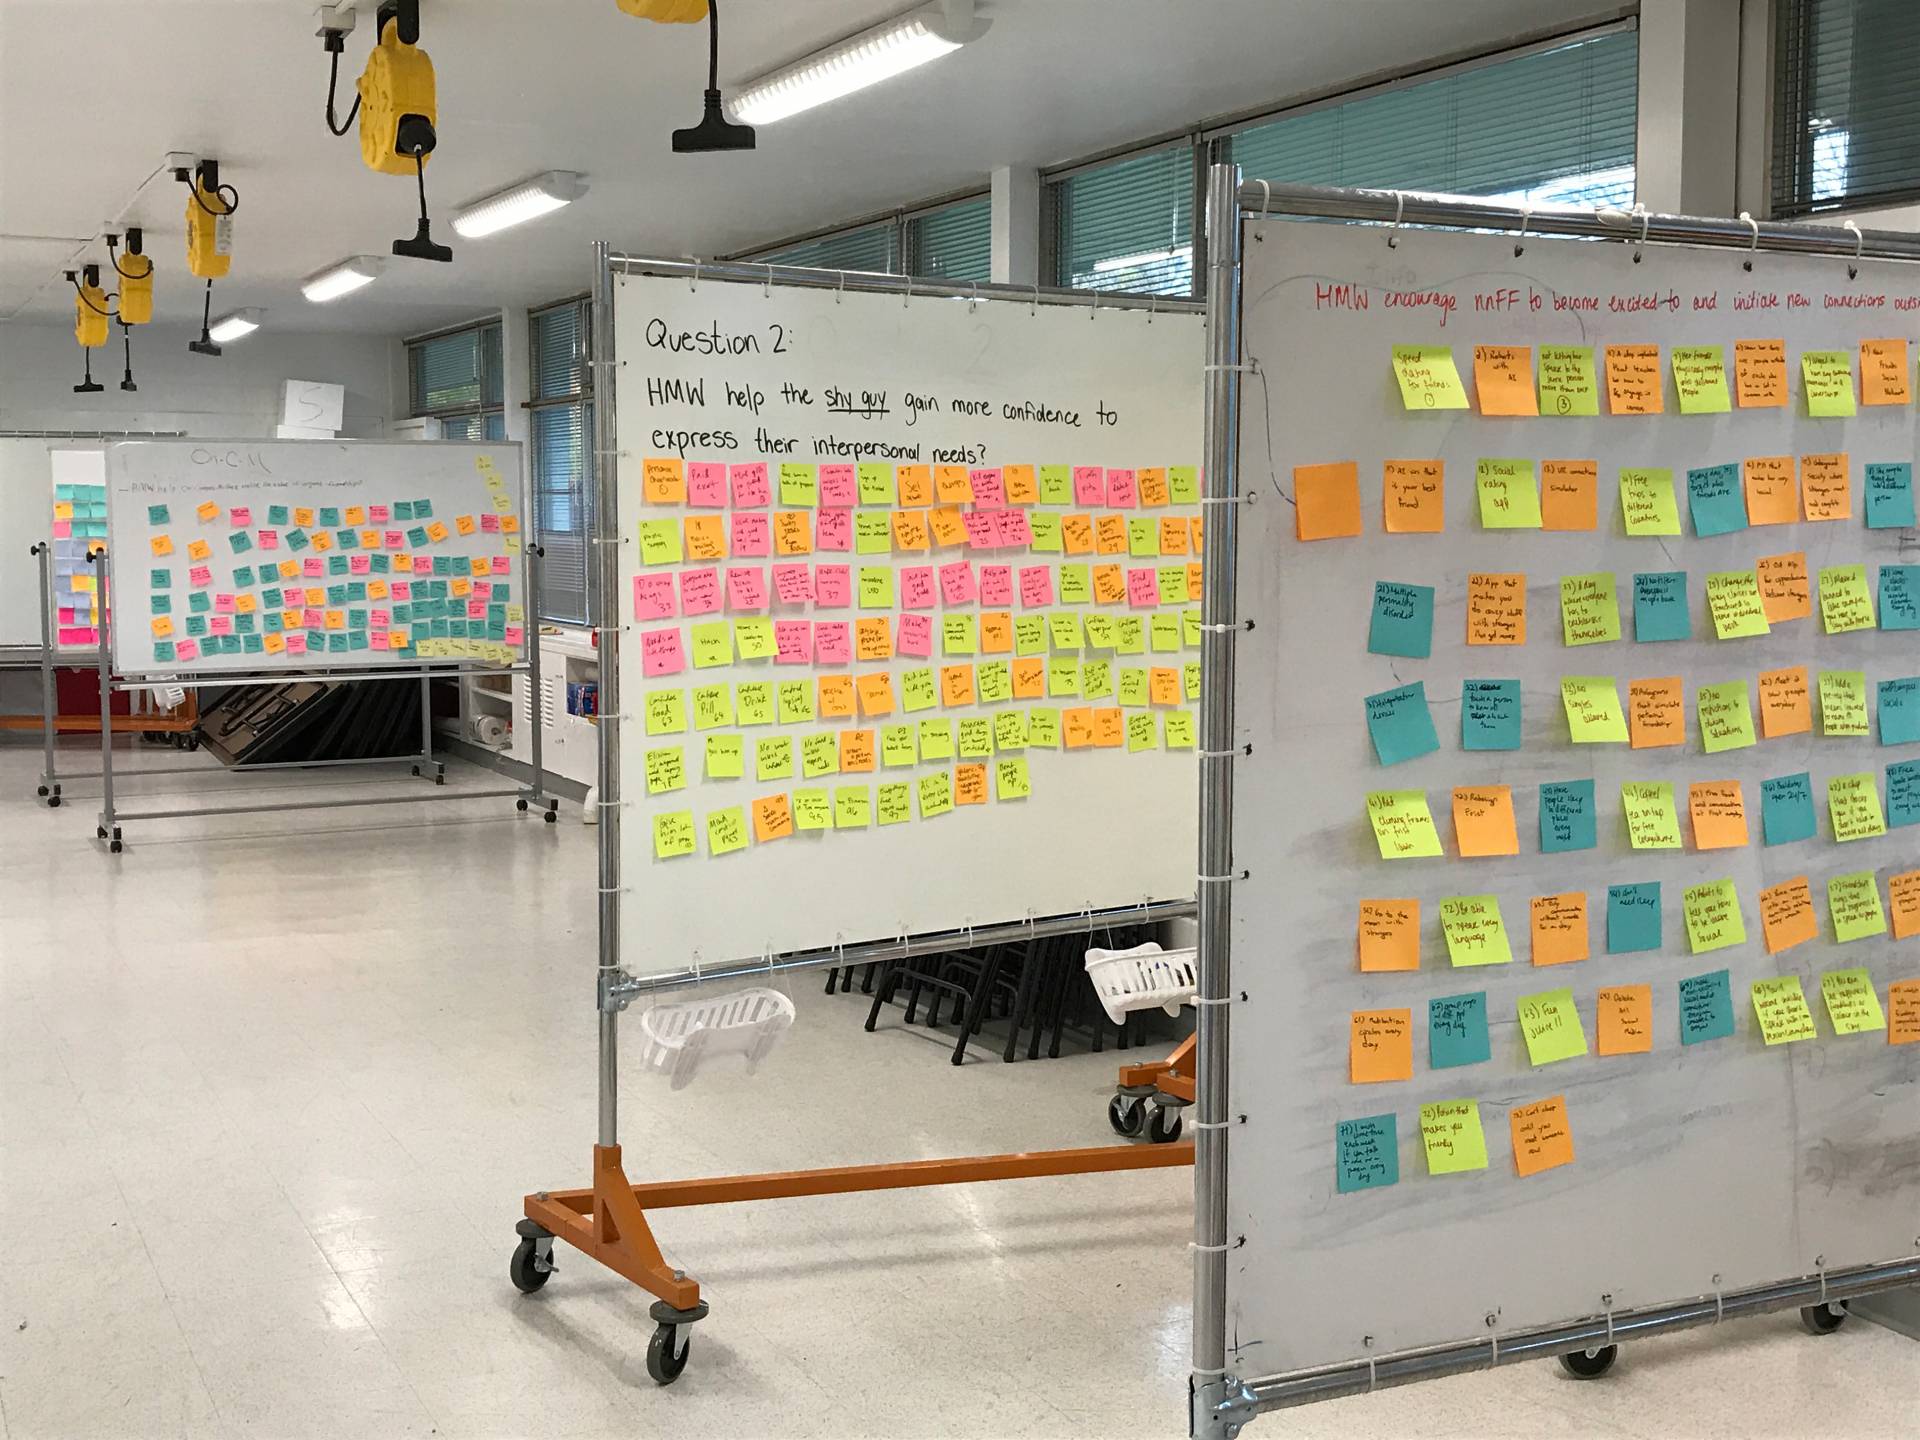 Four whiteboards covered in post-it notes